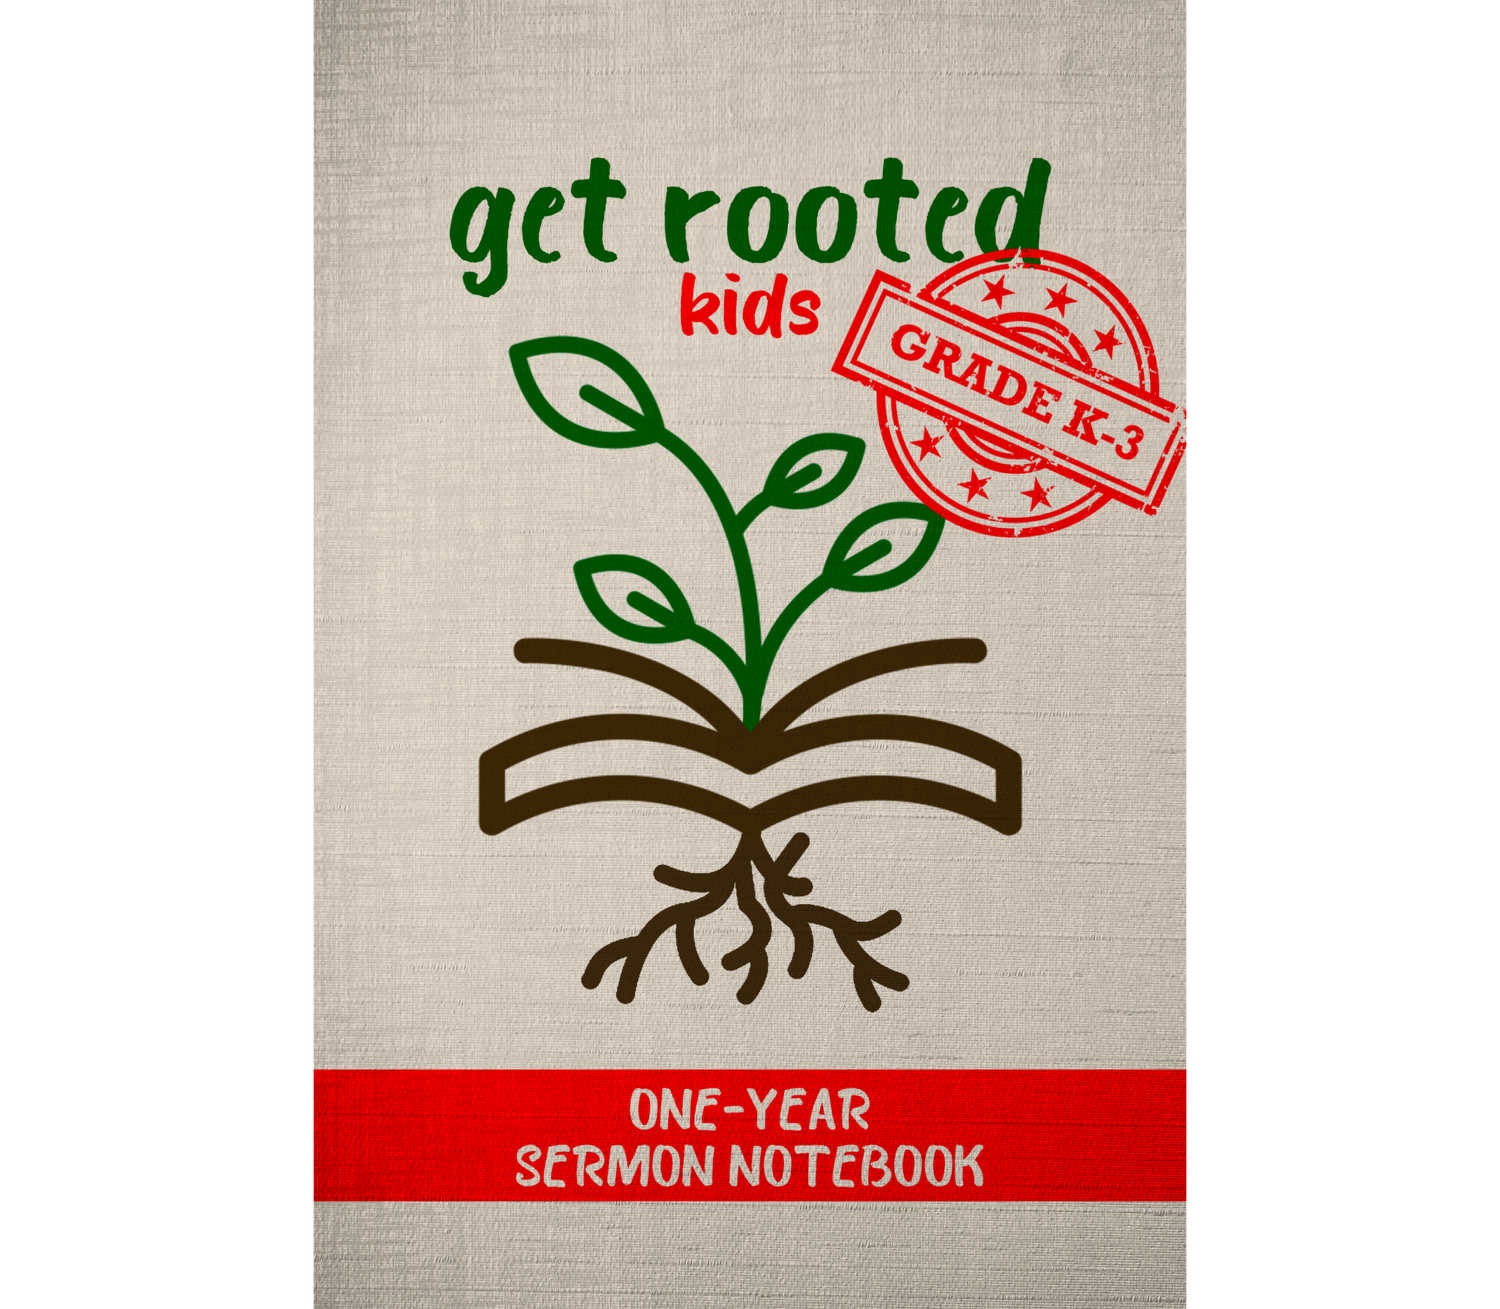 Get Rooted One-Year Sermon Notebook (Grade K-3)